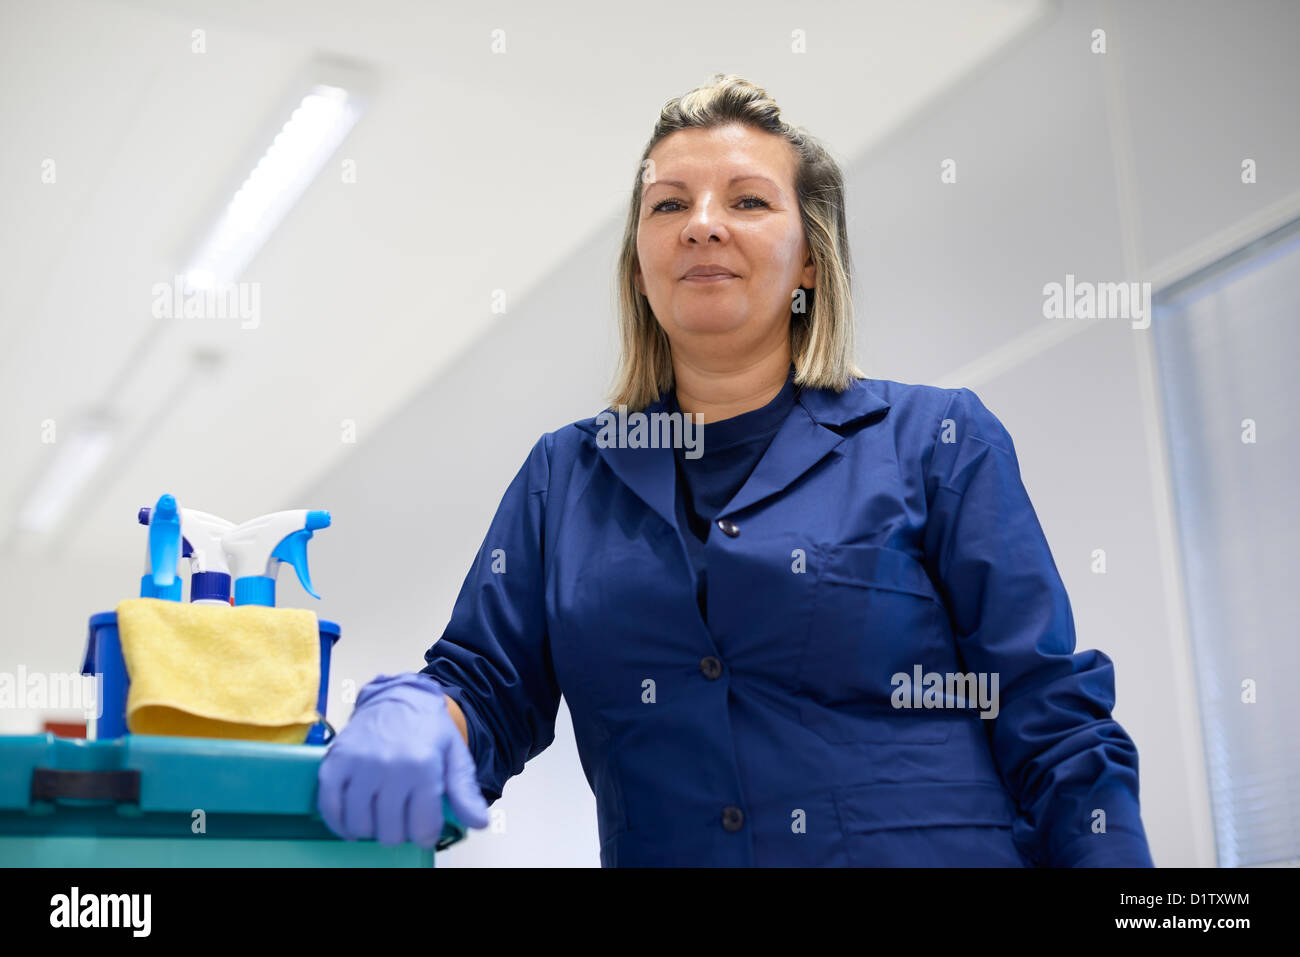 Women at work, portrait of happy professional female cleaner smiling and looking at camera in office. Low angle view Stock Photo